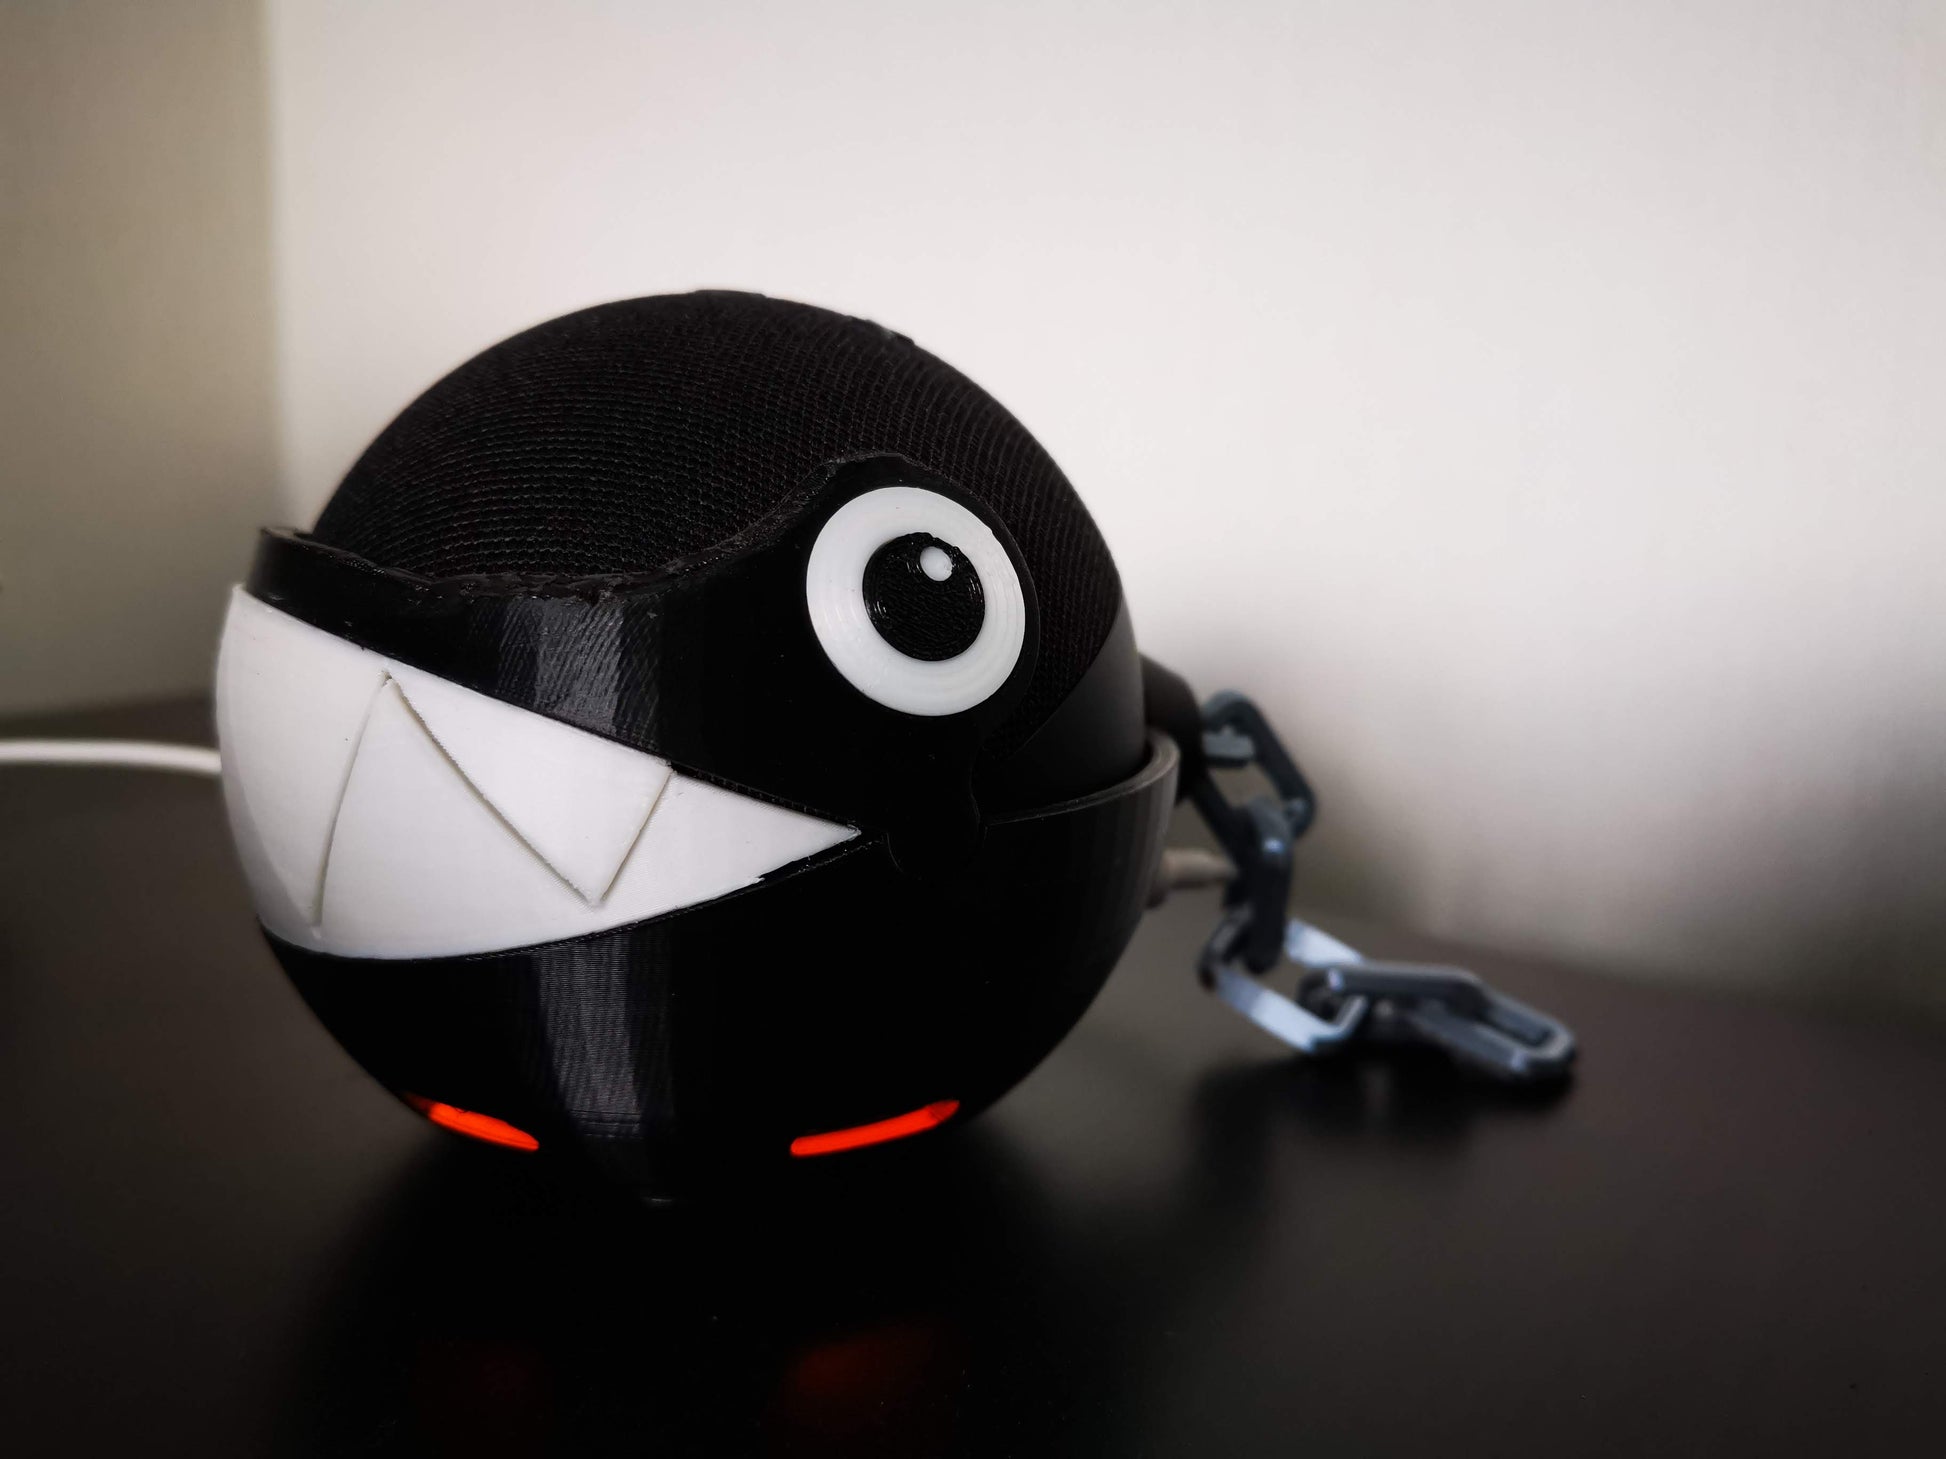 Chain Chomp Alexa Echo holder from front side angle